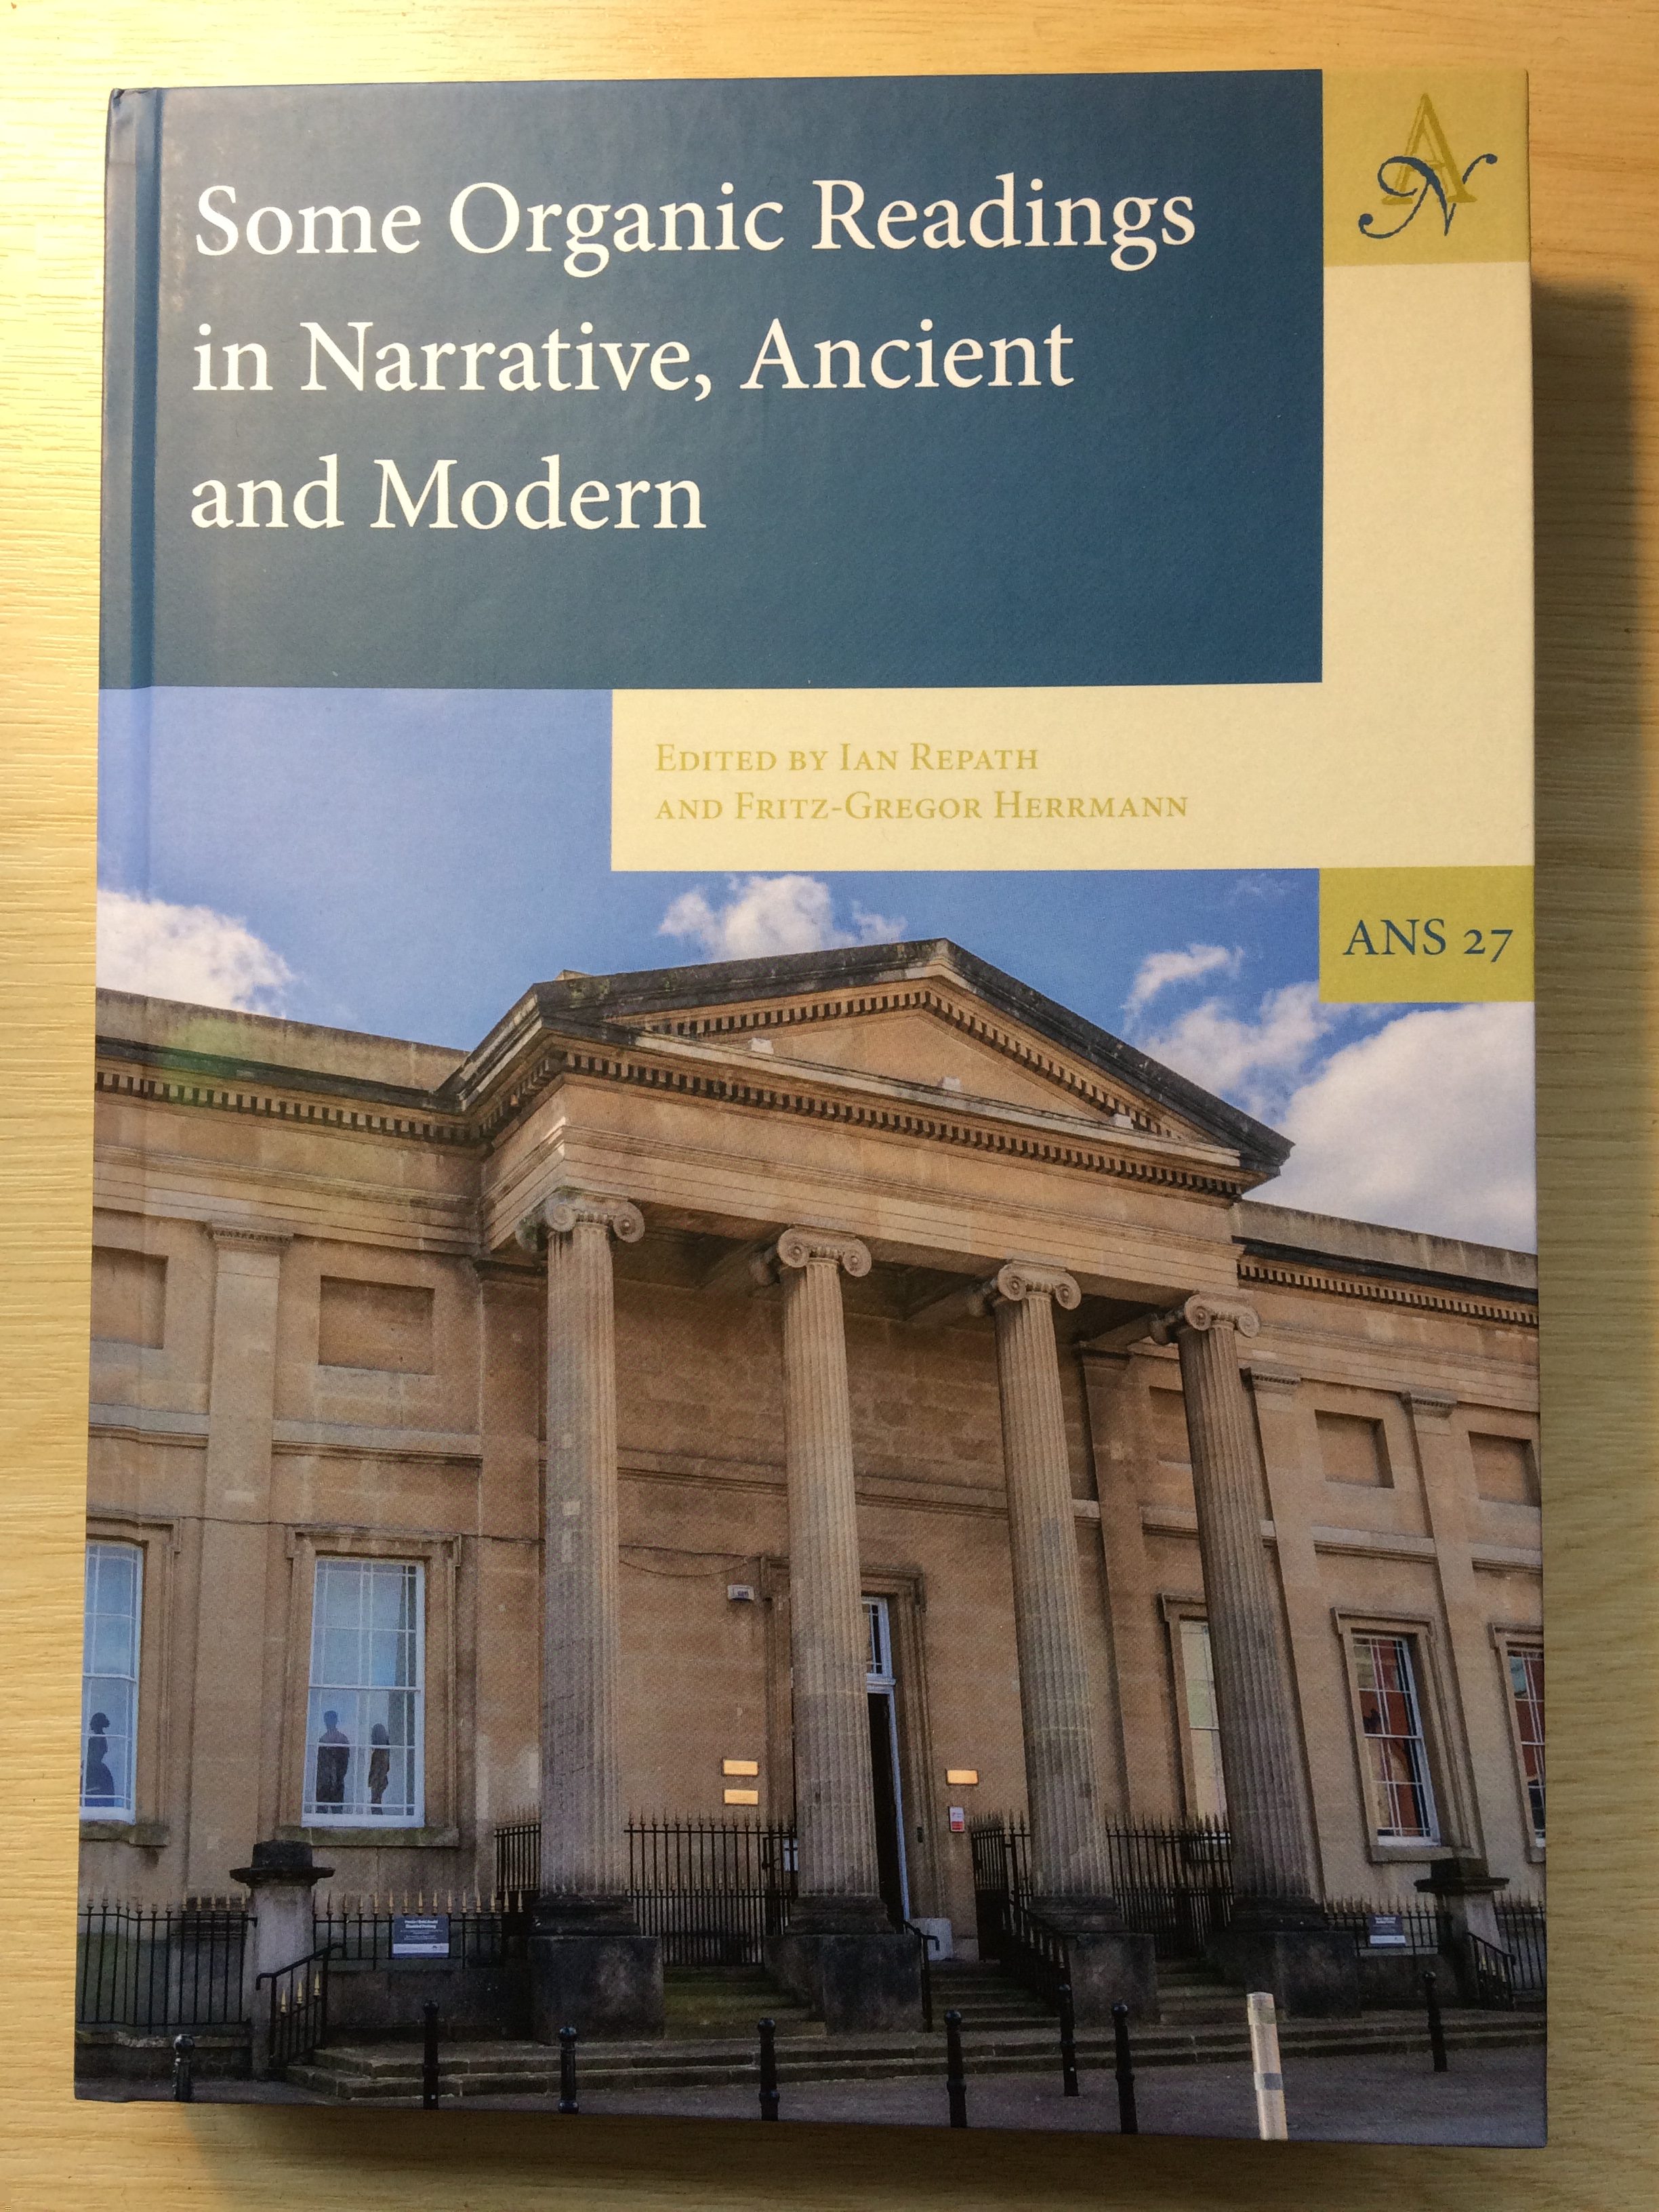 Some Organic Readings in Narrative, Ancient and Modern